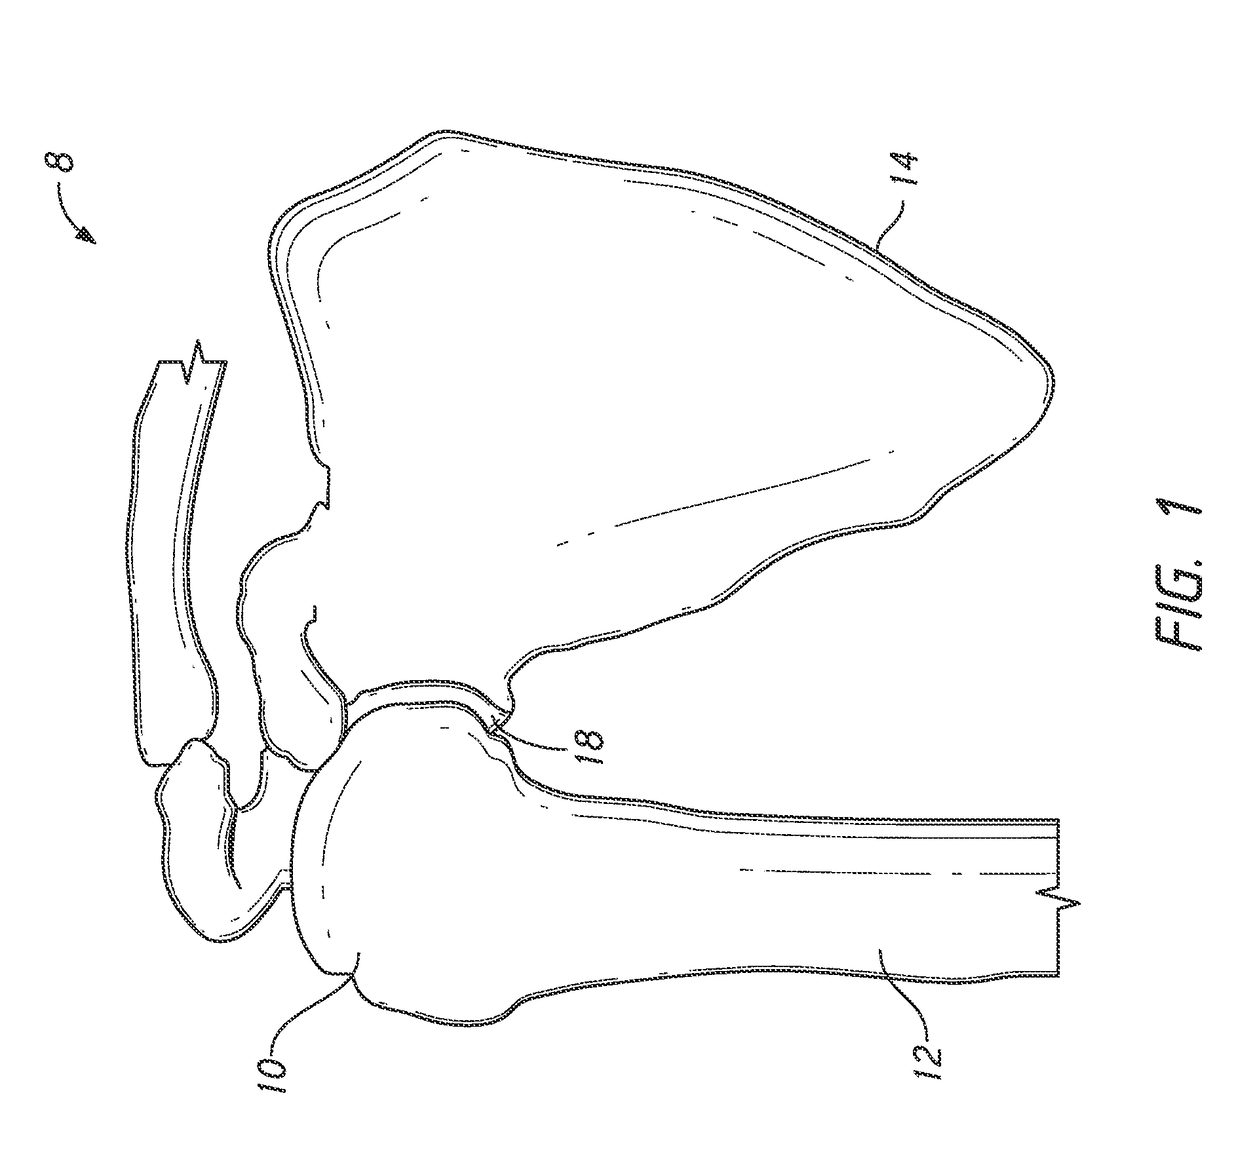 Guides and instruments for improving accuracy of glenoid implant placement